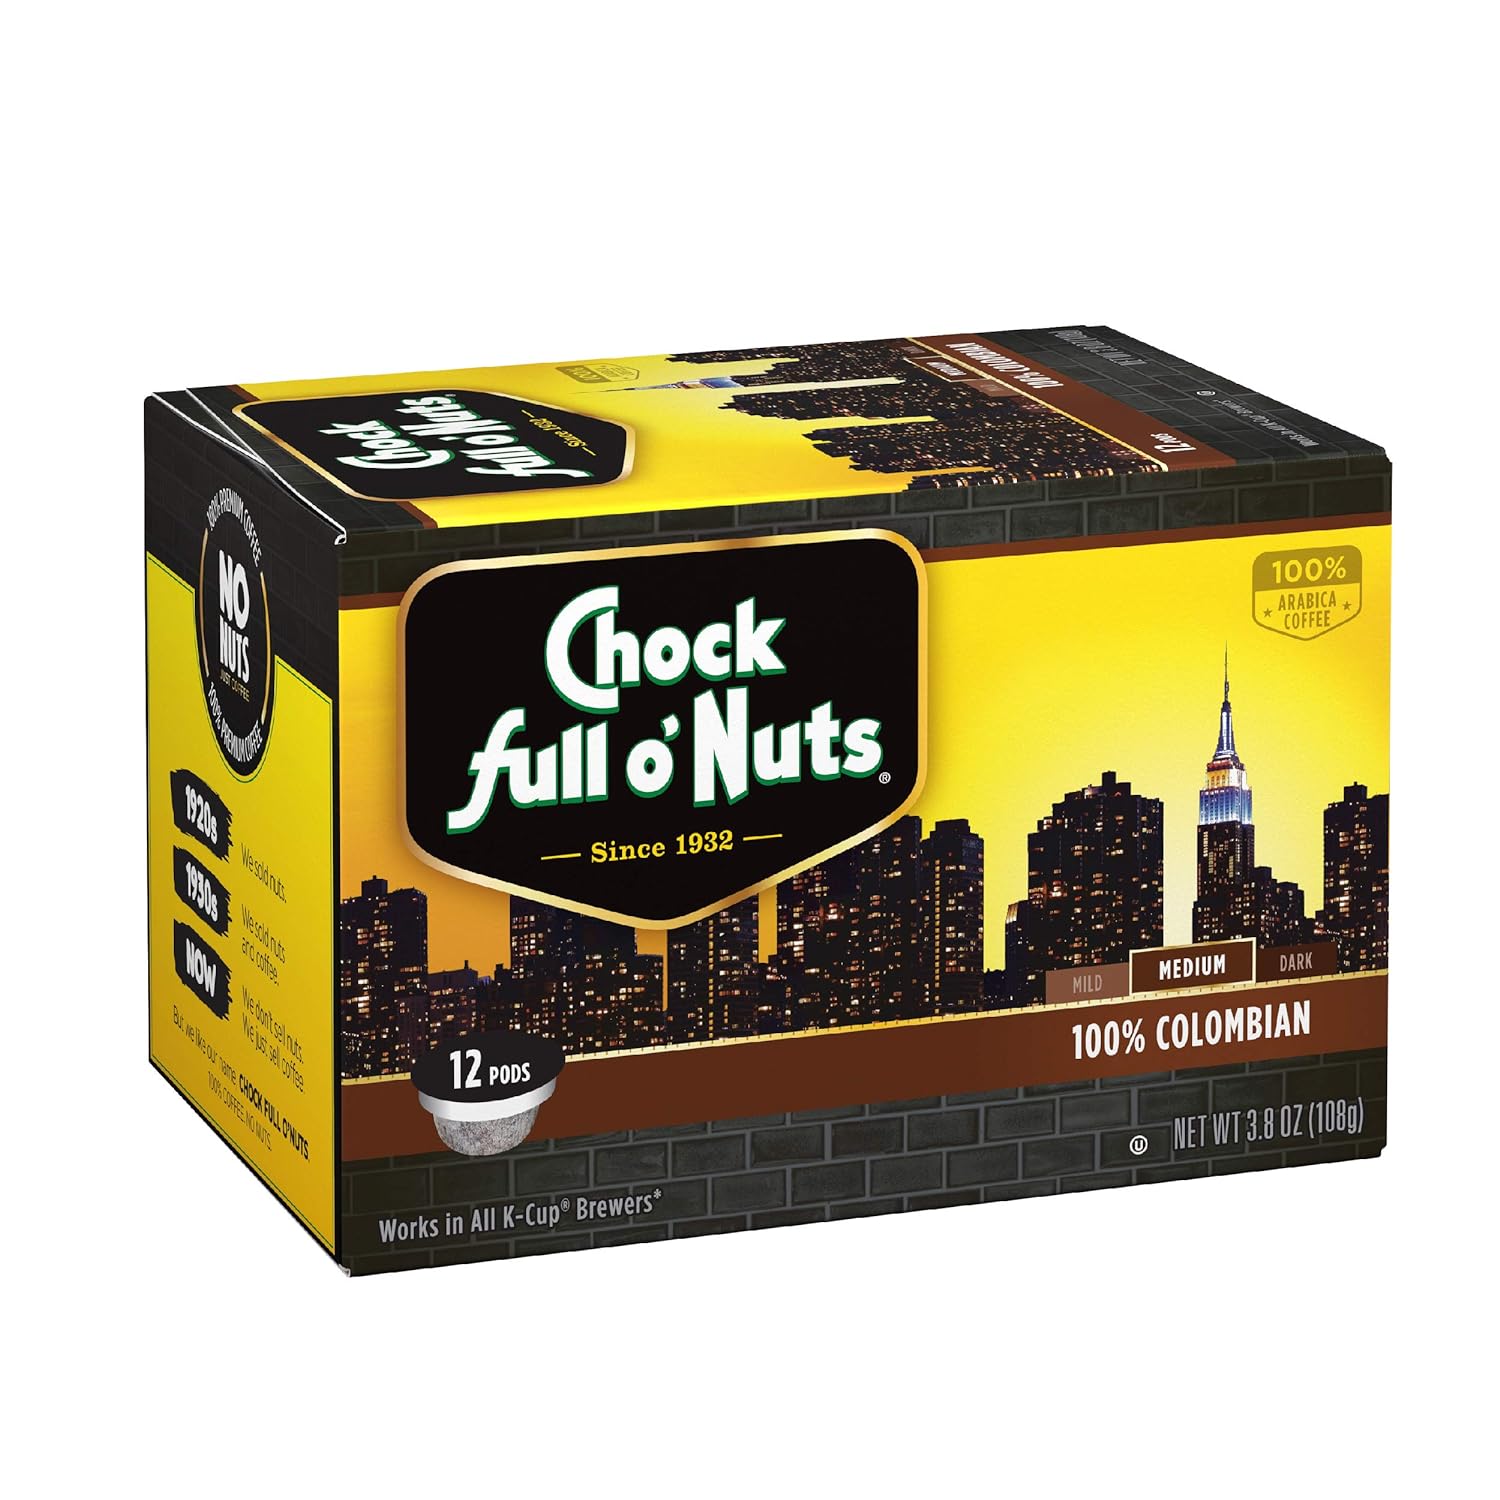 Chock Full o’Nuts Colombian Medium Roast, K-Cup Compatible Pods (12 Count) – Arabica Coffee In Eco-Friendly Keurig-Compatible Single Serve Cups